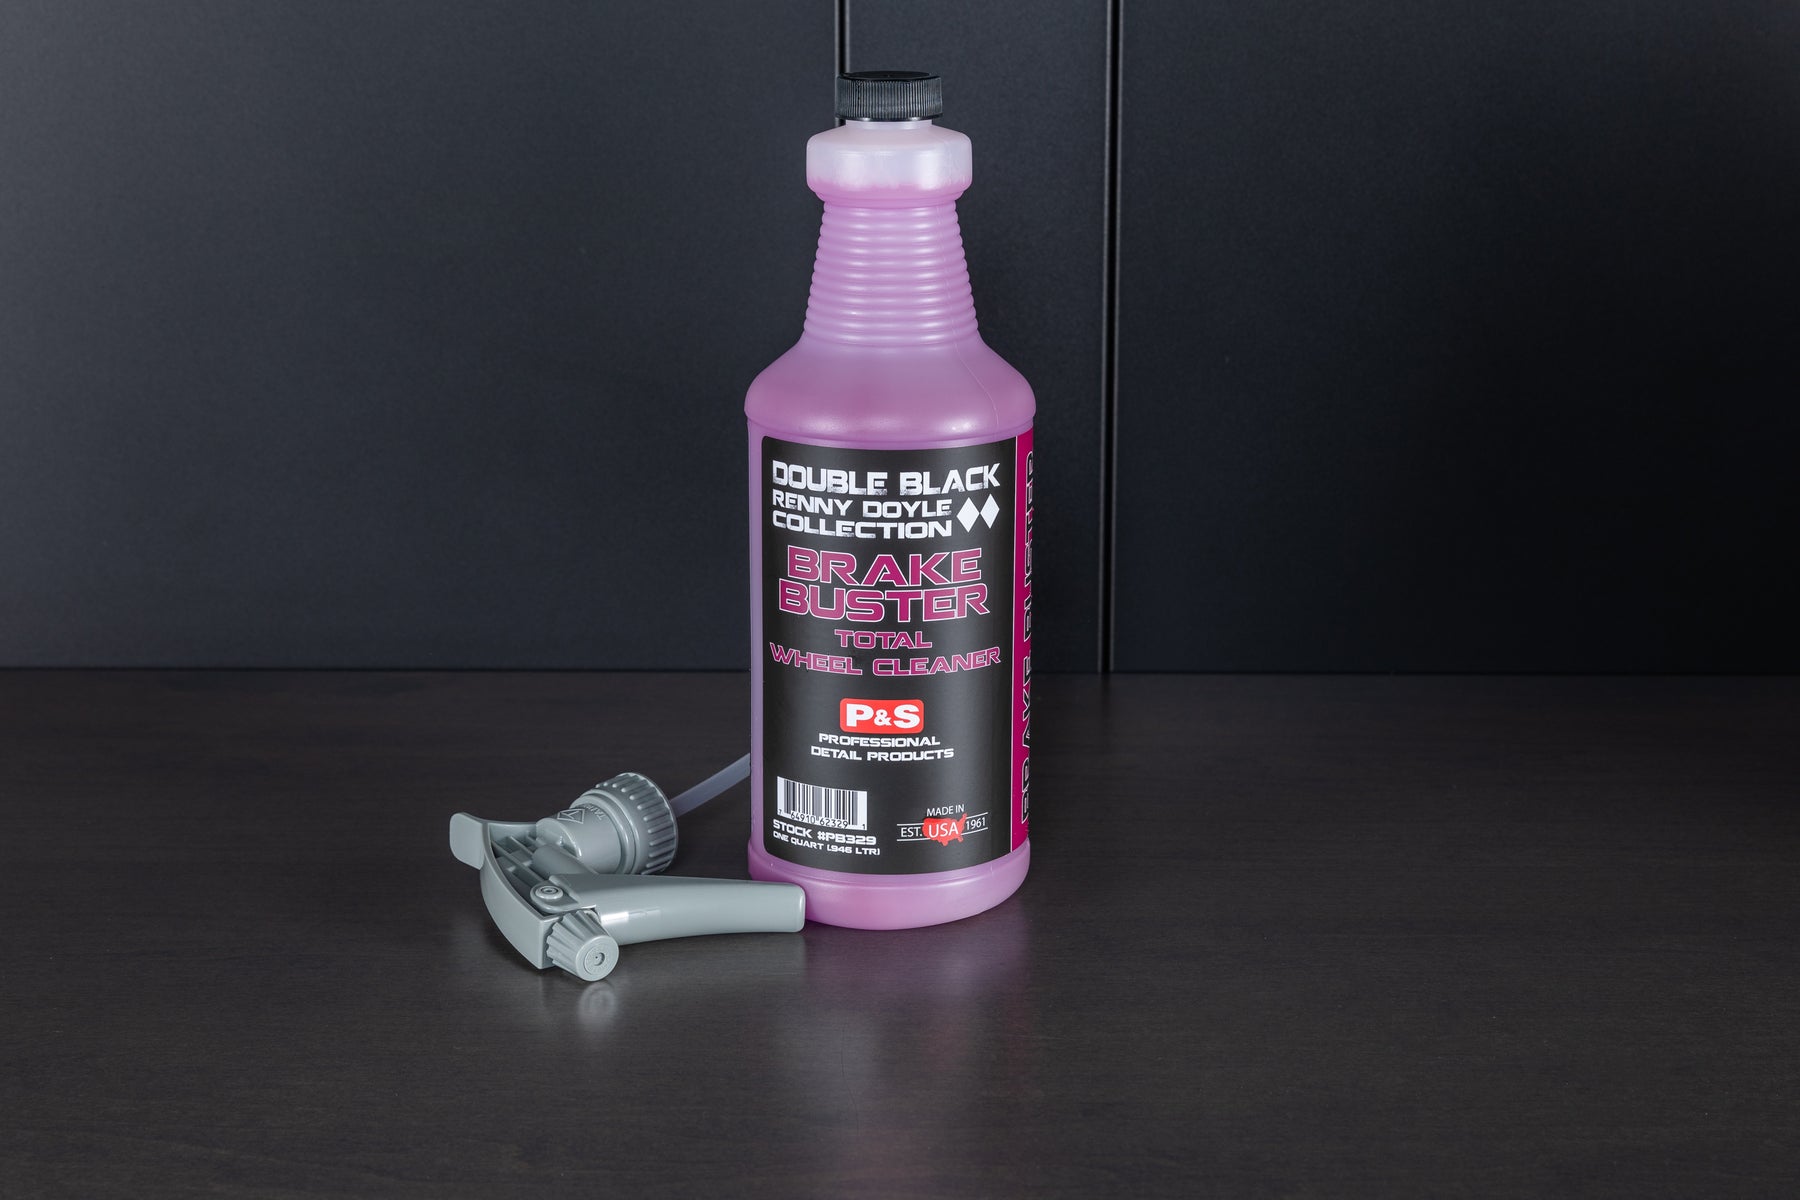 P&S Brake Buster Non-Acid Wheel & Tire Cleaner — Detailers Choice Car Care